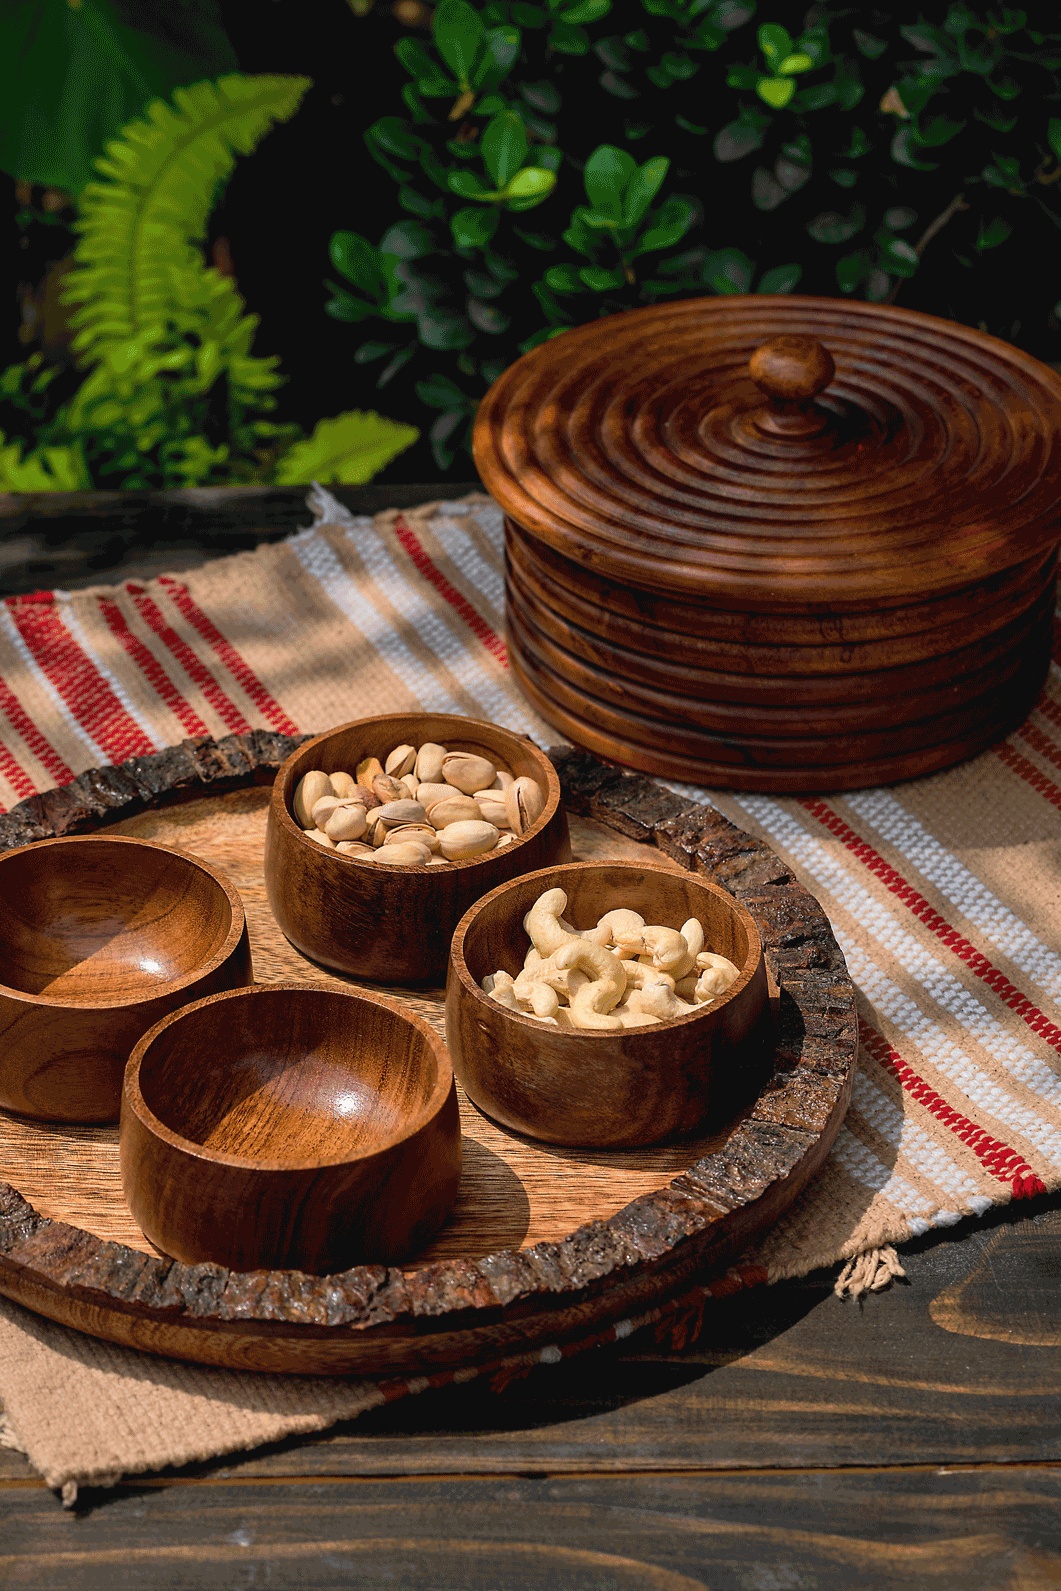 Chhaal - Unique wooden plate, a product by Araana Homes